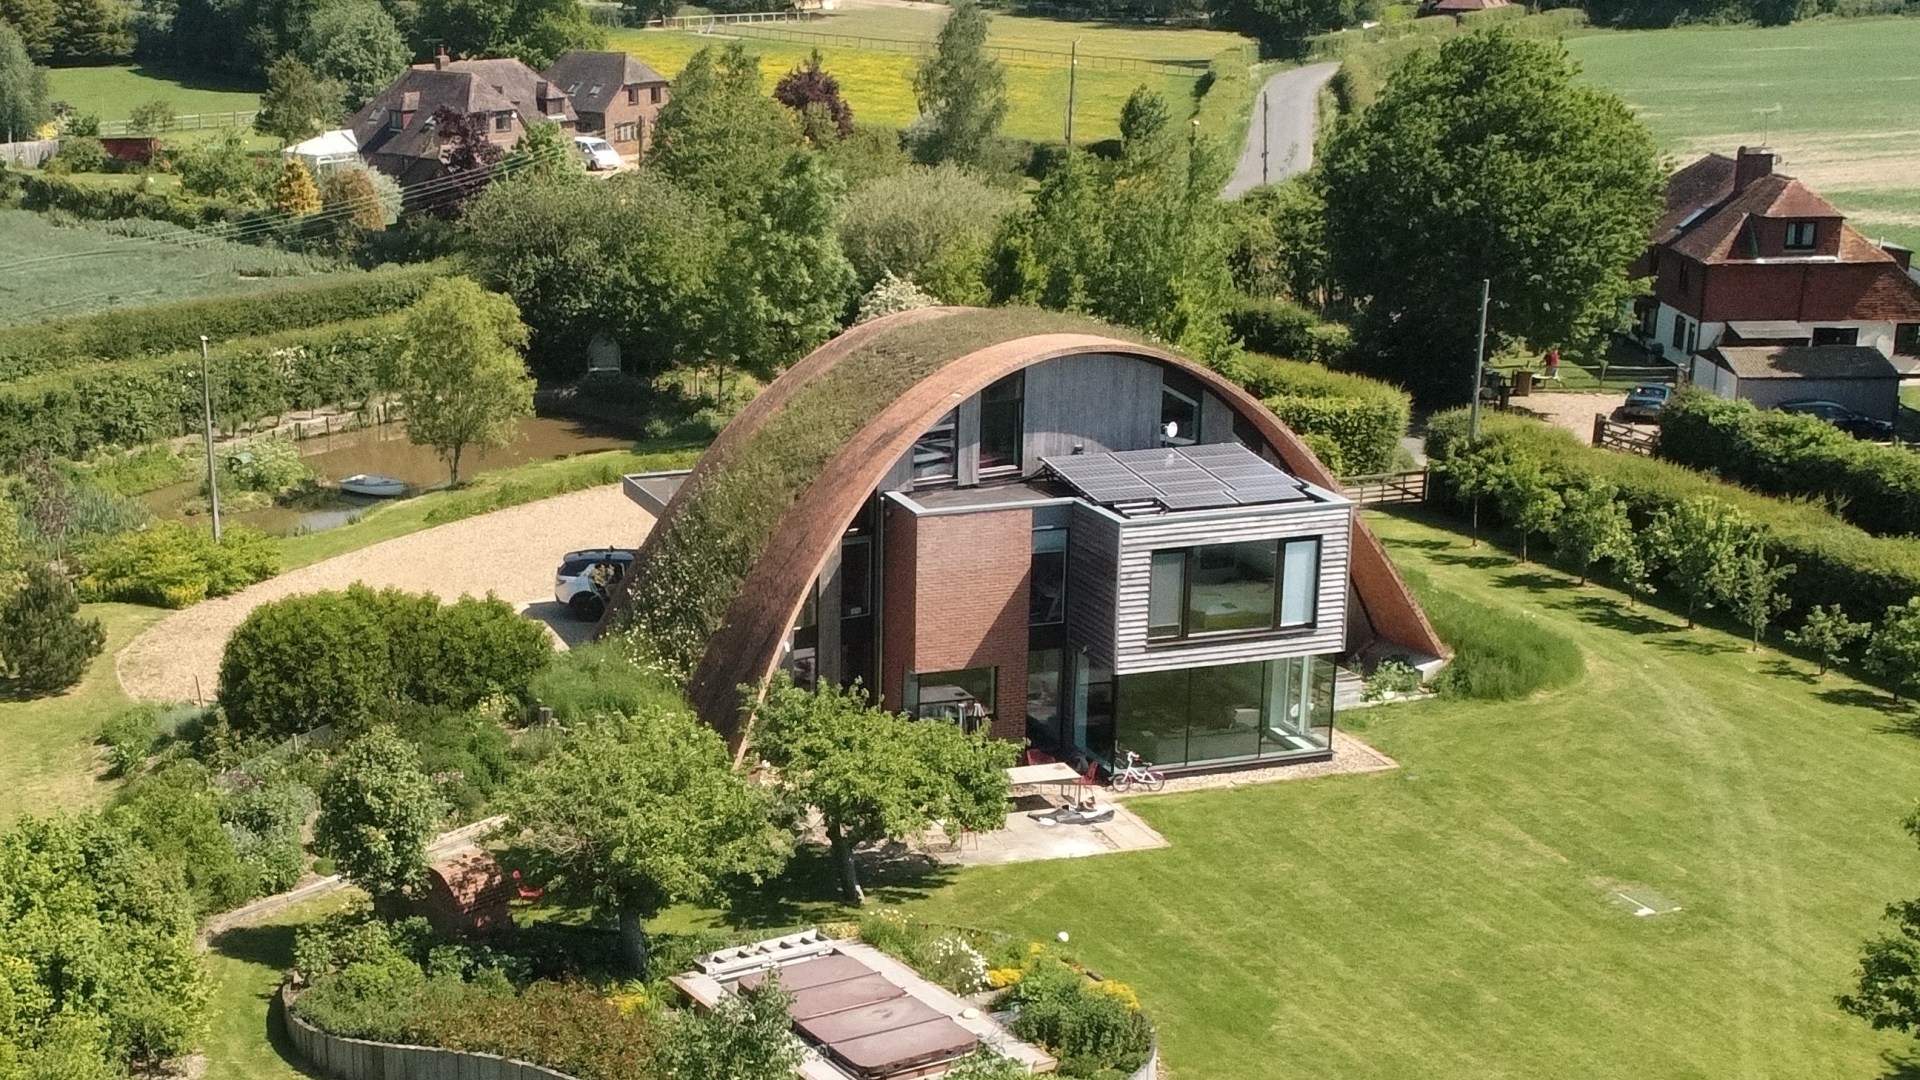 How I Lost £200k When My Grand Designs Home’s Roof Caved In – A Cautionary Tale